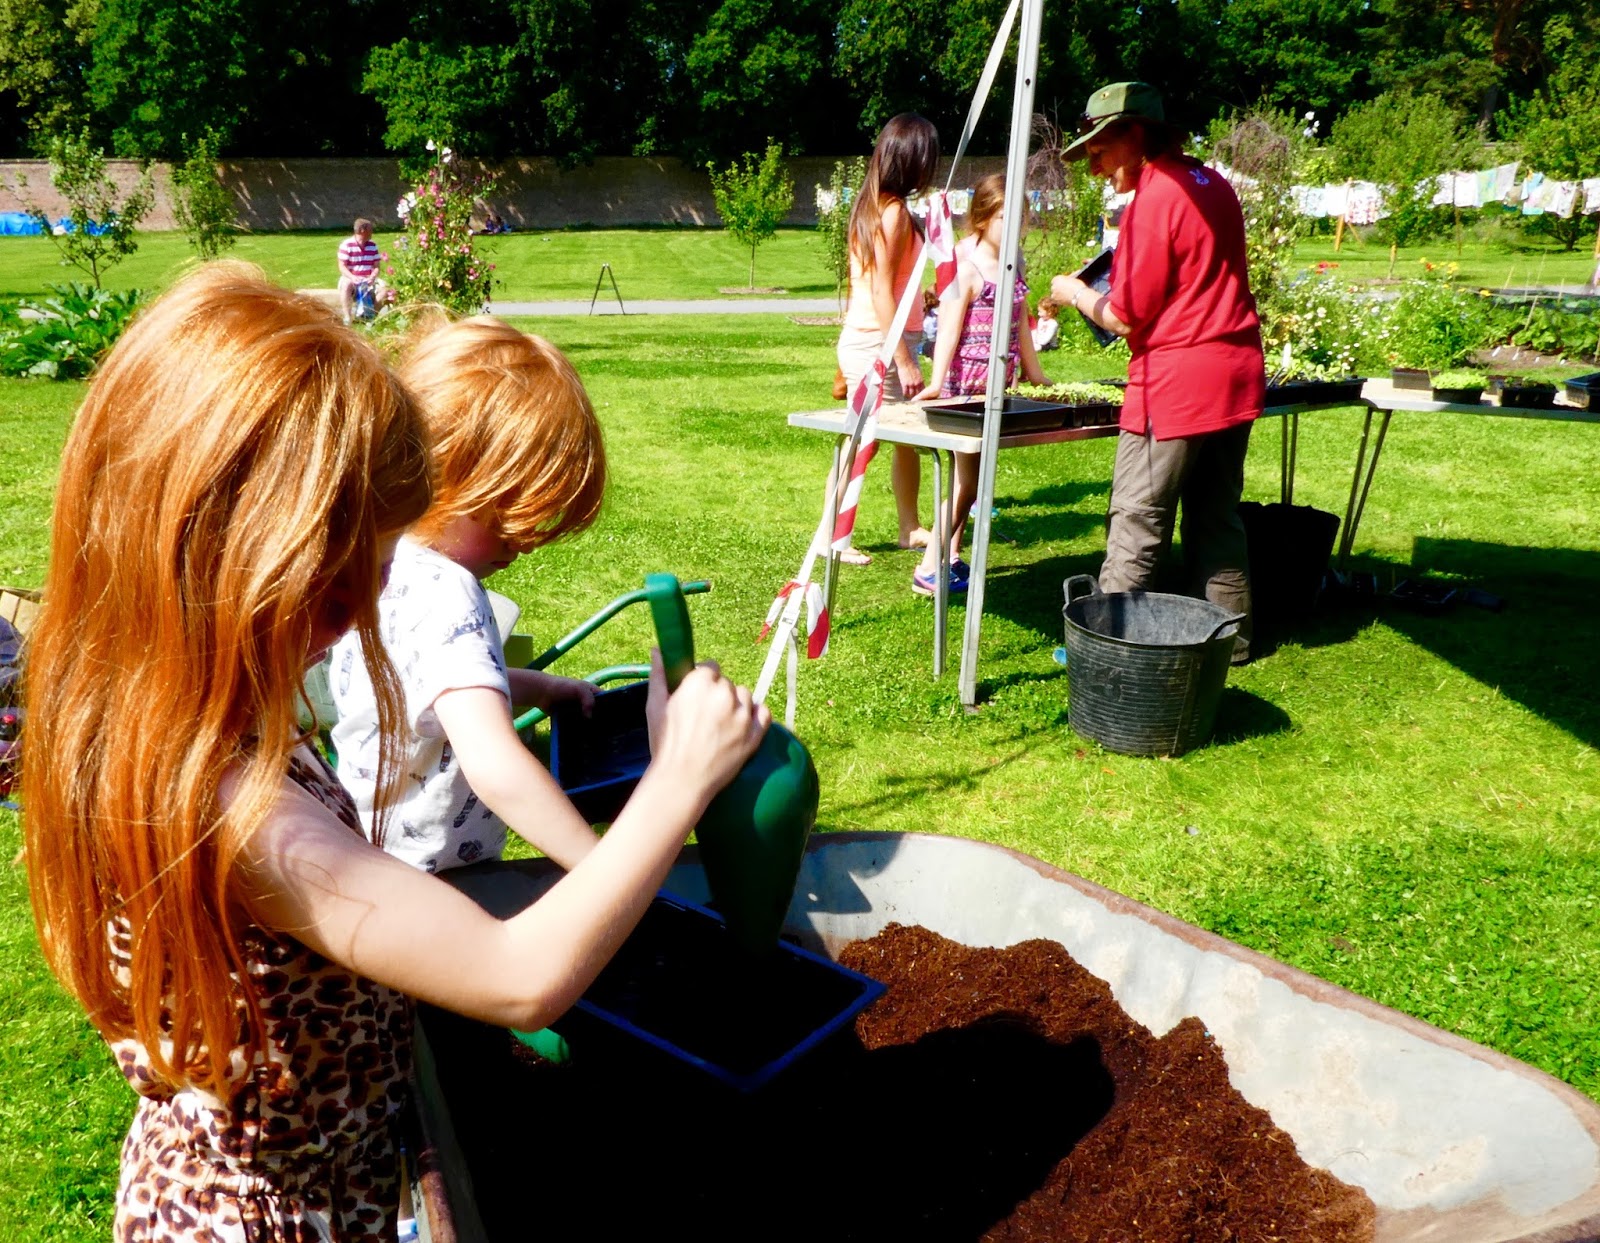 Gibside - A North East National Trust Property that's ideal for Picnics, Adventure Playground fun and beautiful gardens - Walled Garden create your own salad tray activity